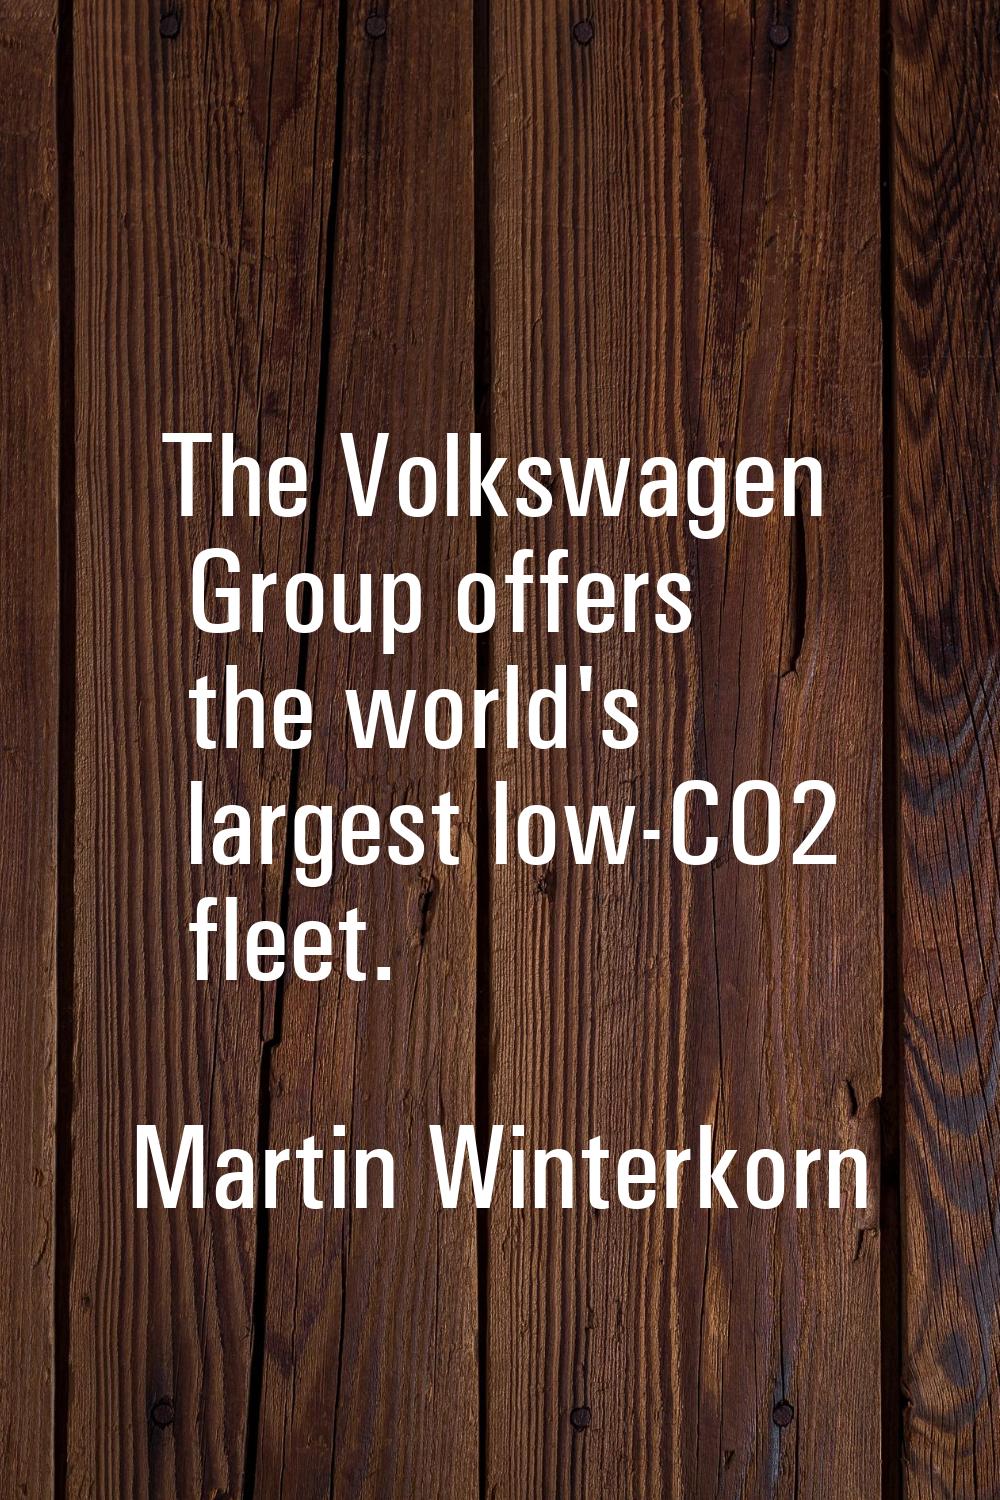 The Volkswagen Group offers the world's largest low-CO2 fleet.